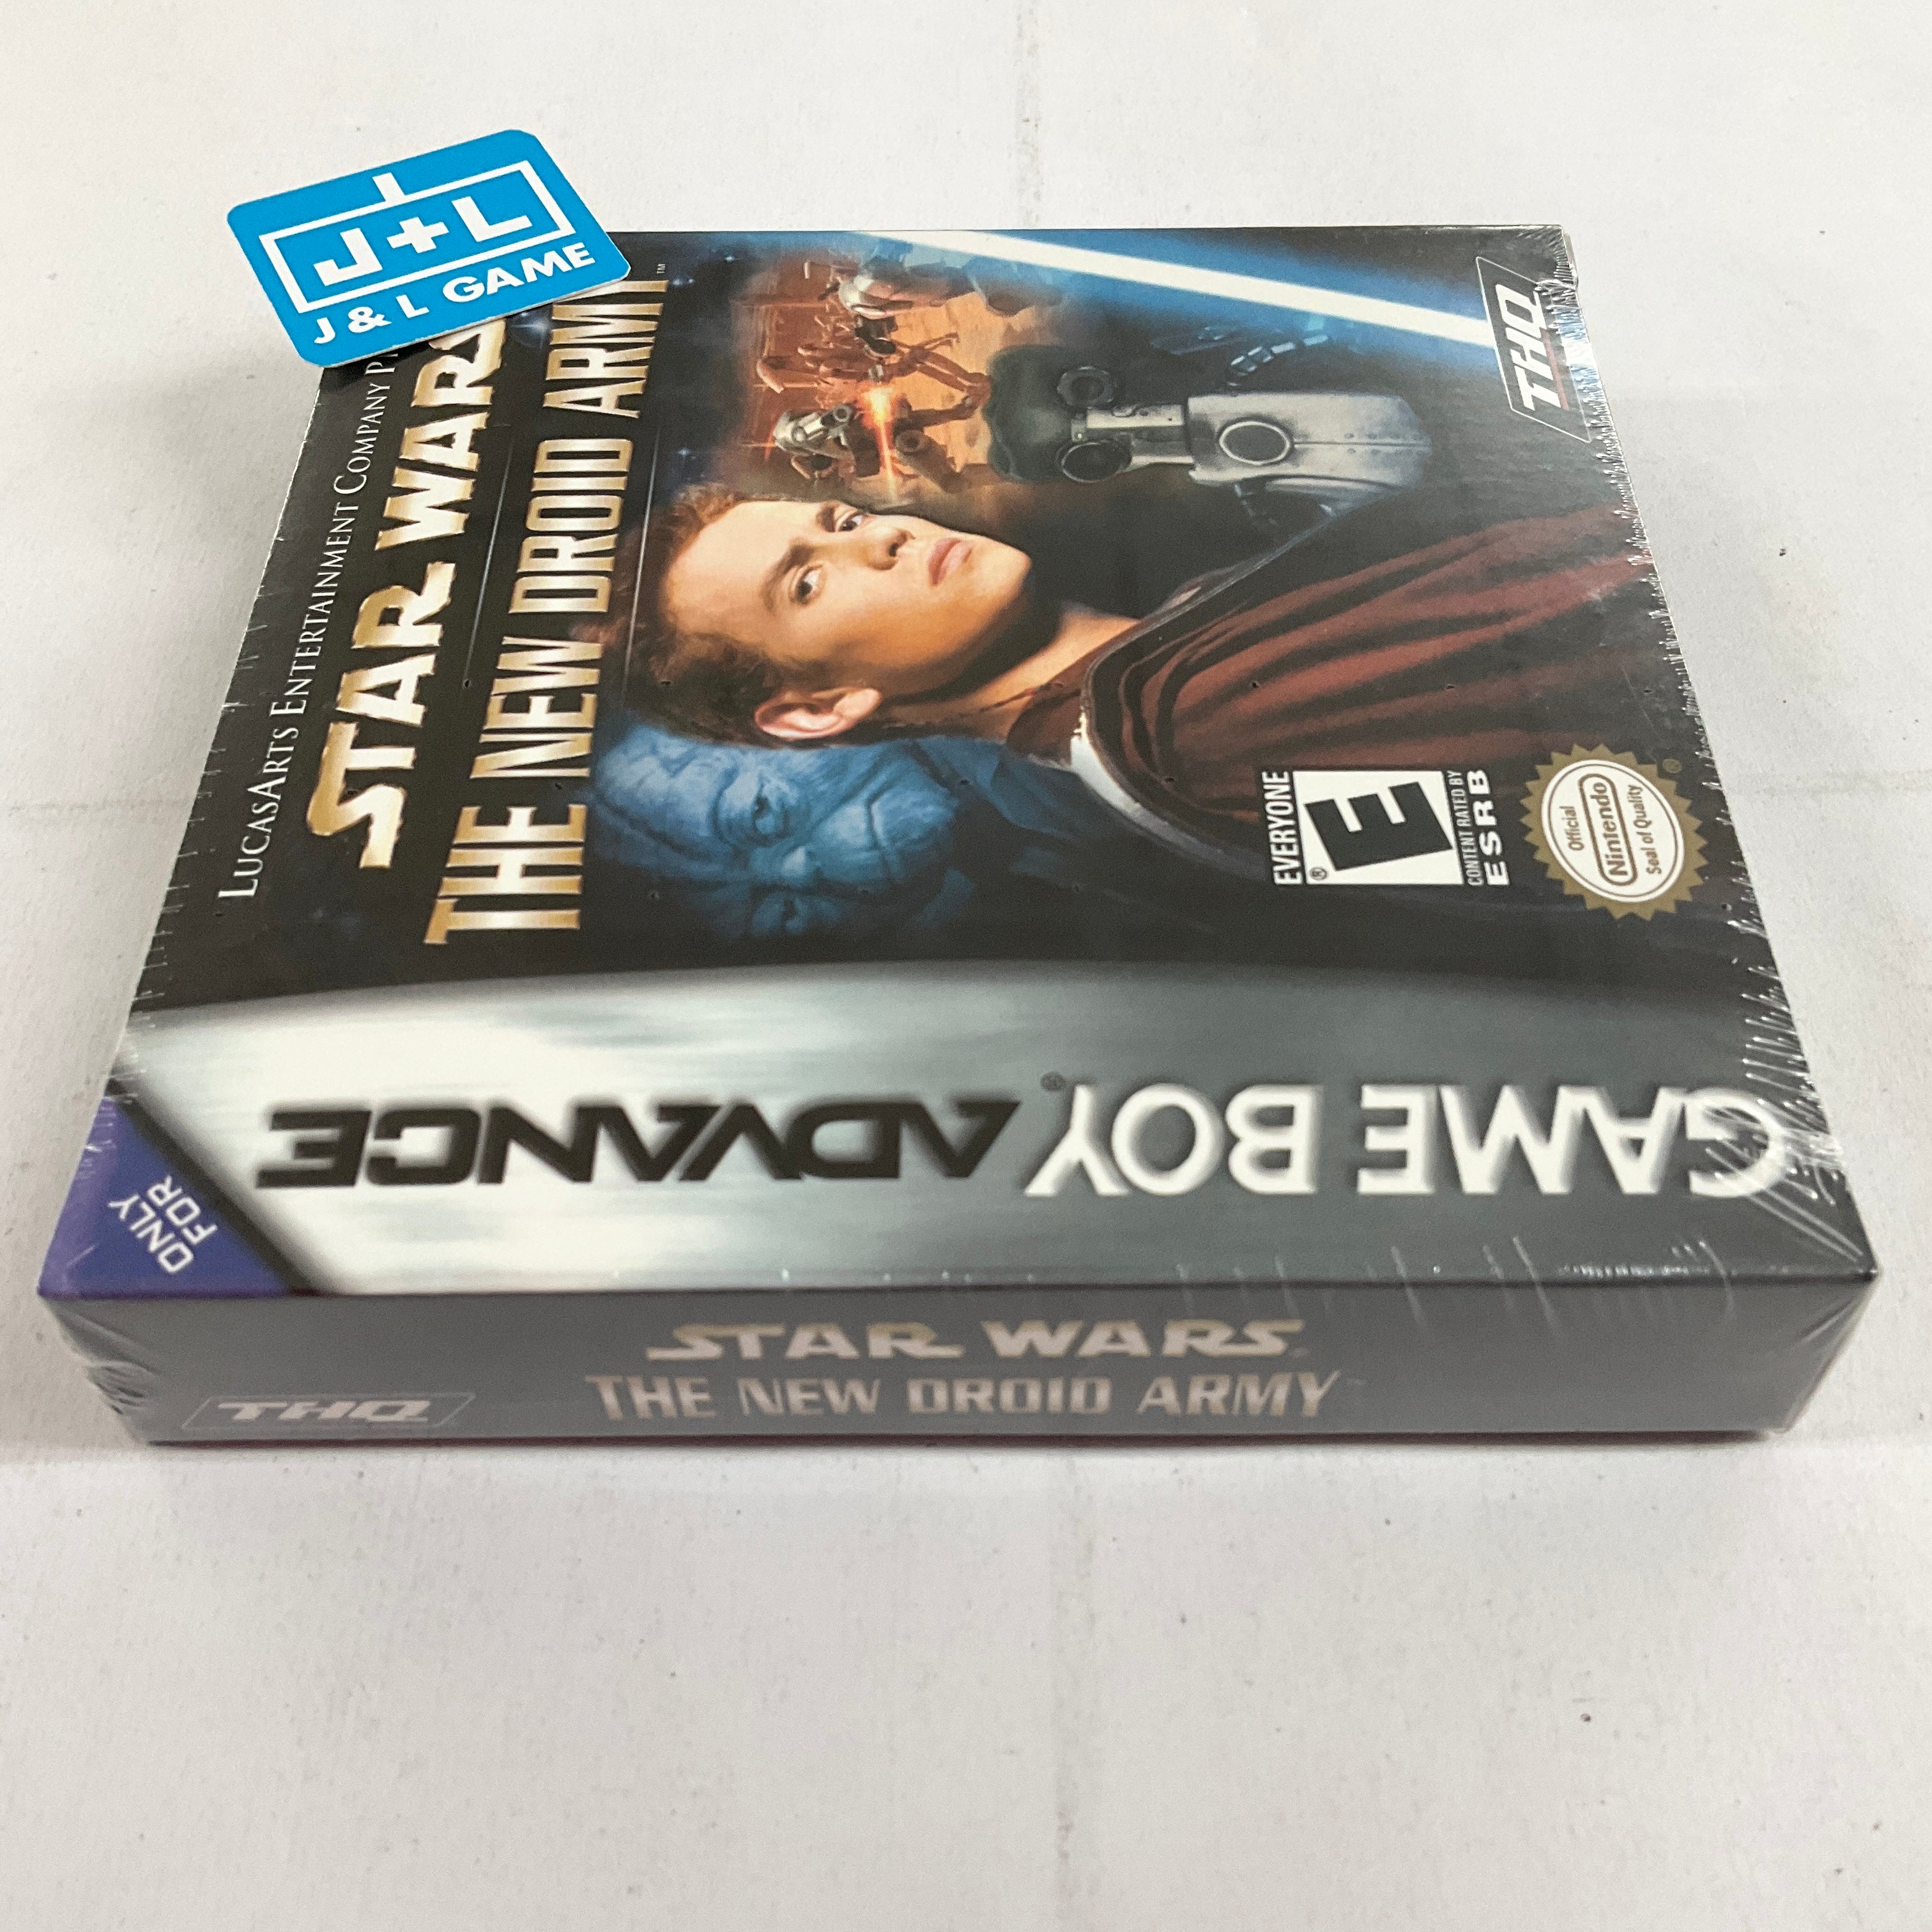 Star Wars: The New Droid Army - (GBA) Game Boy Advance